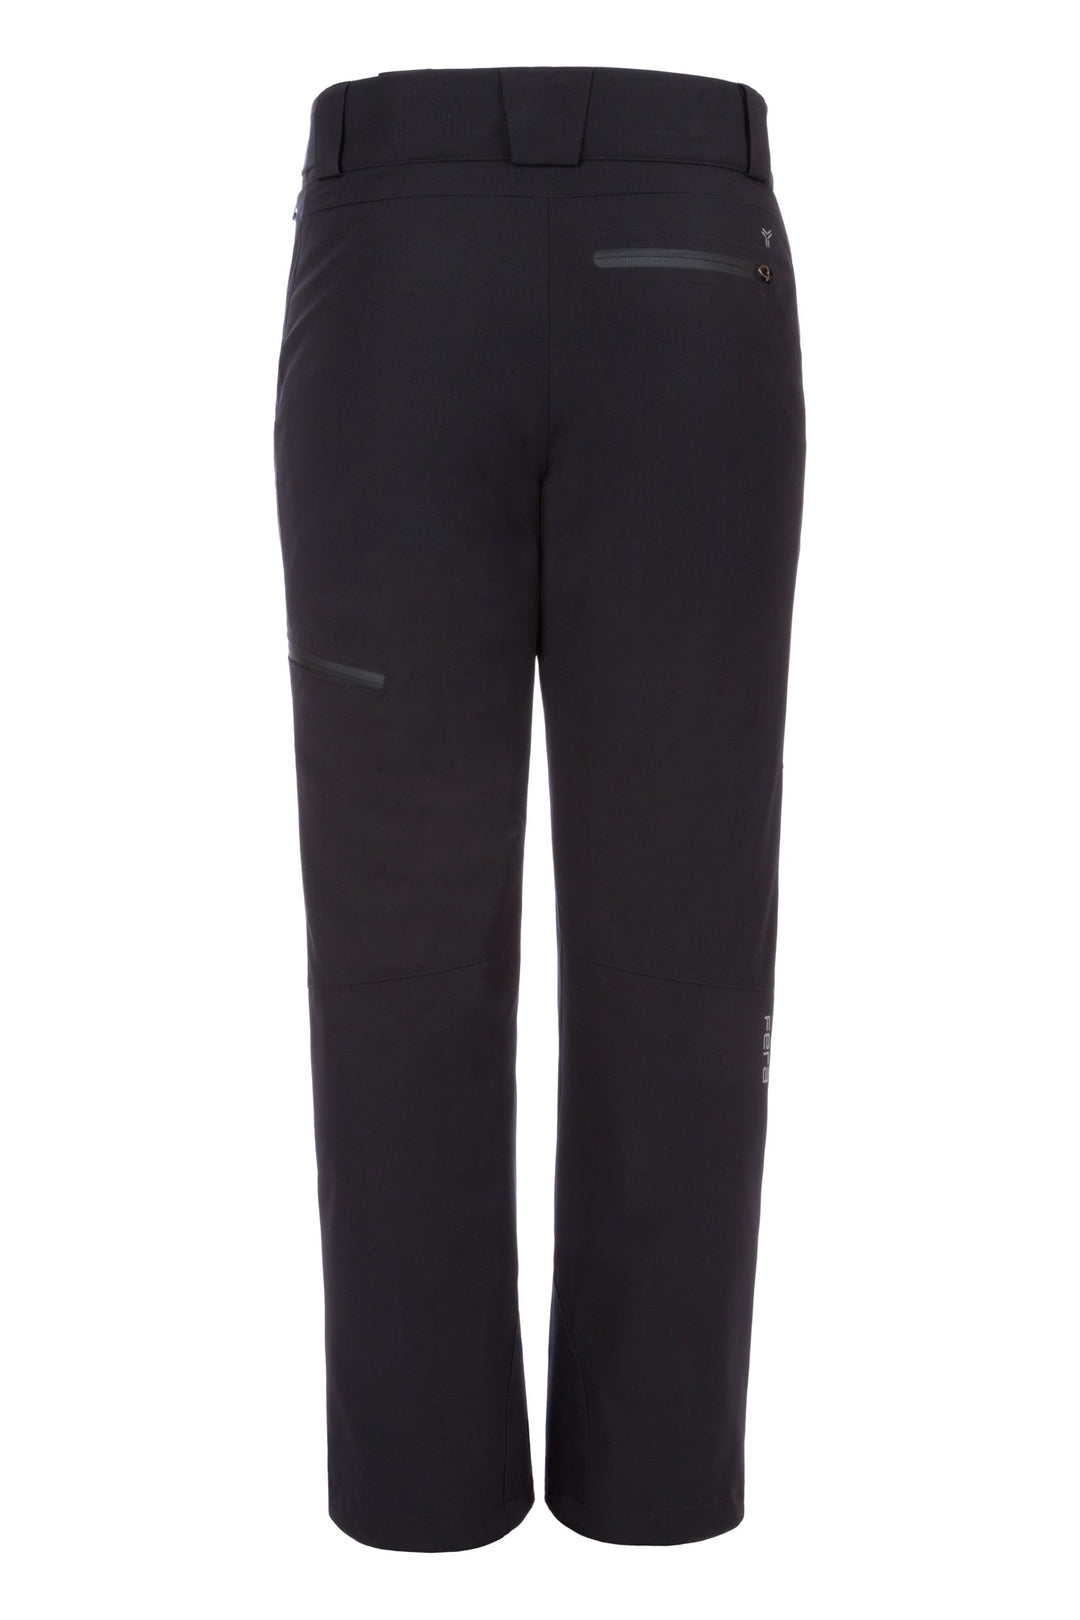 Davos Stretch Insulated Pant